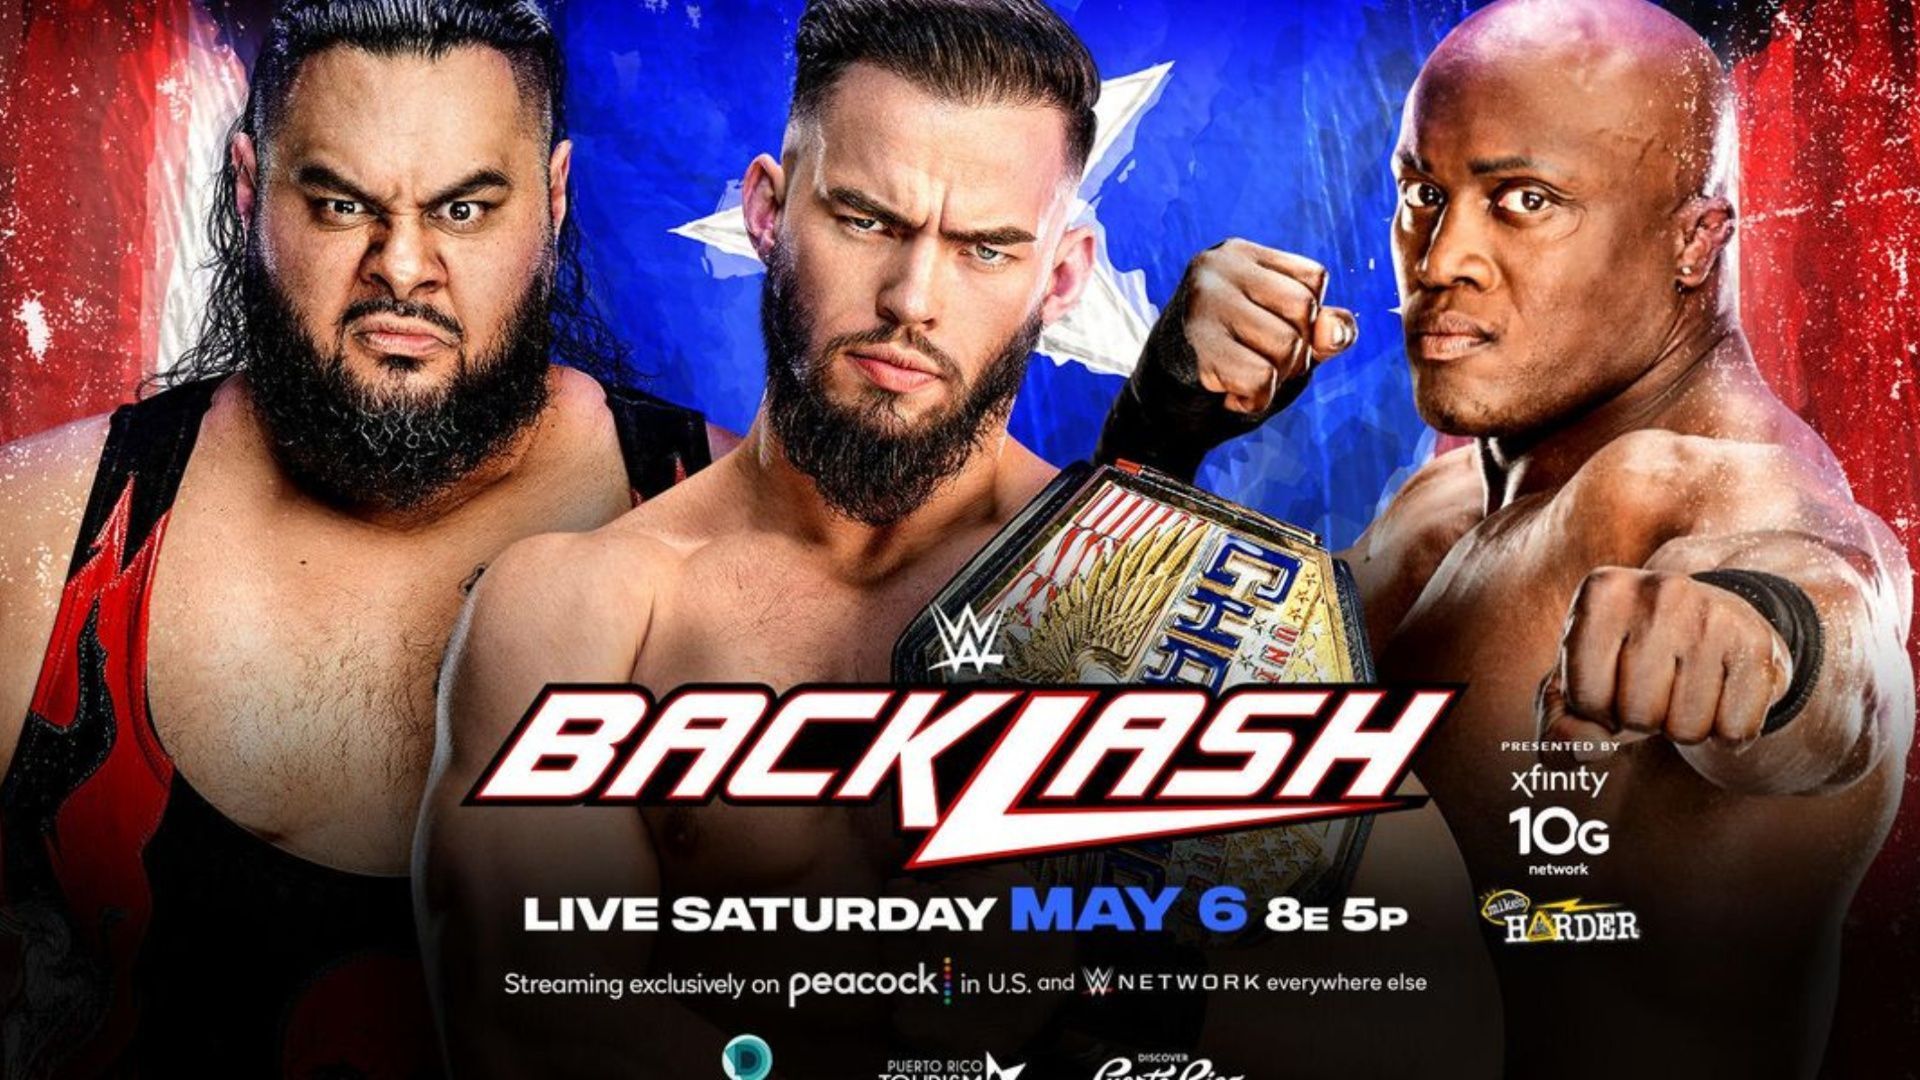 The United States Championship will be decided in a triple threat match at Backlash 2023.